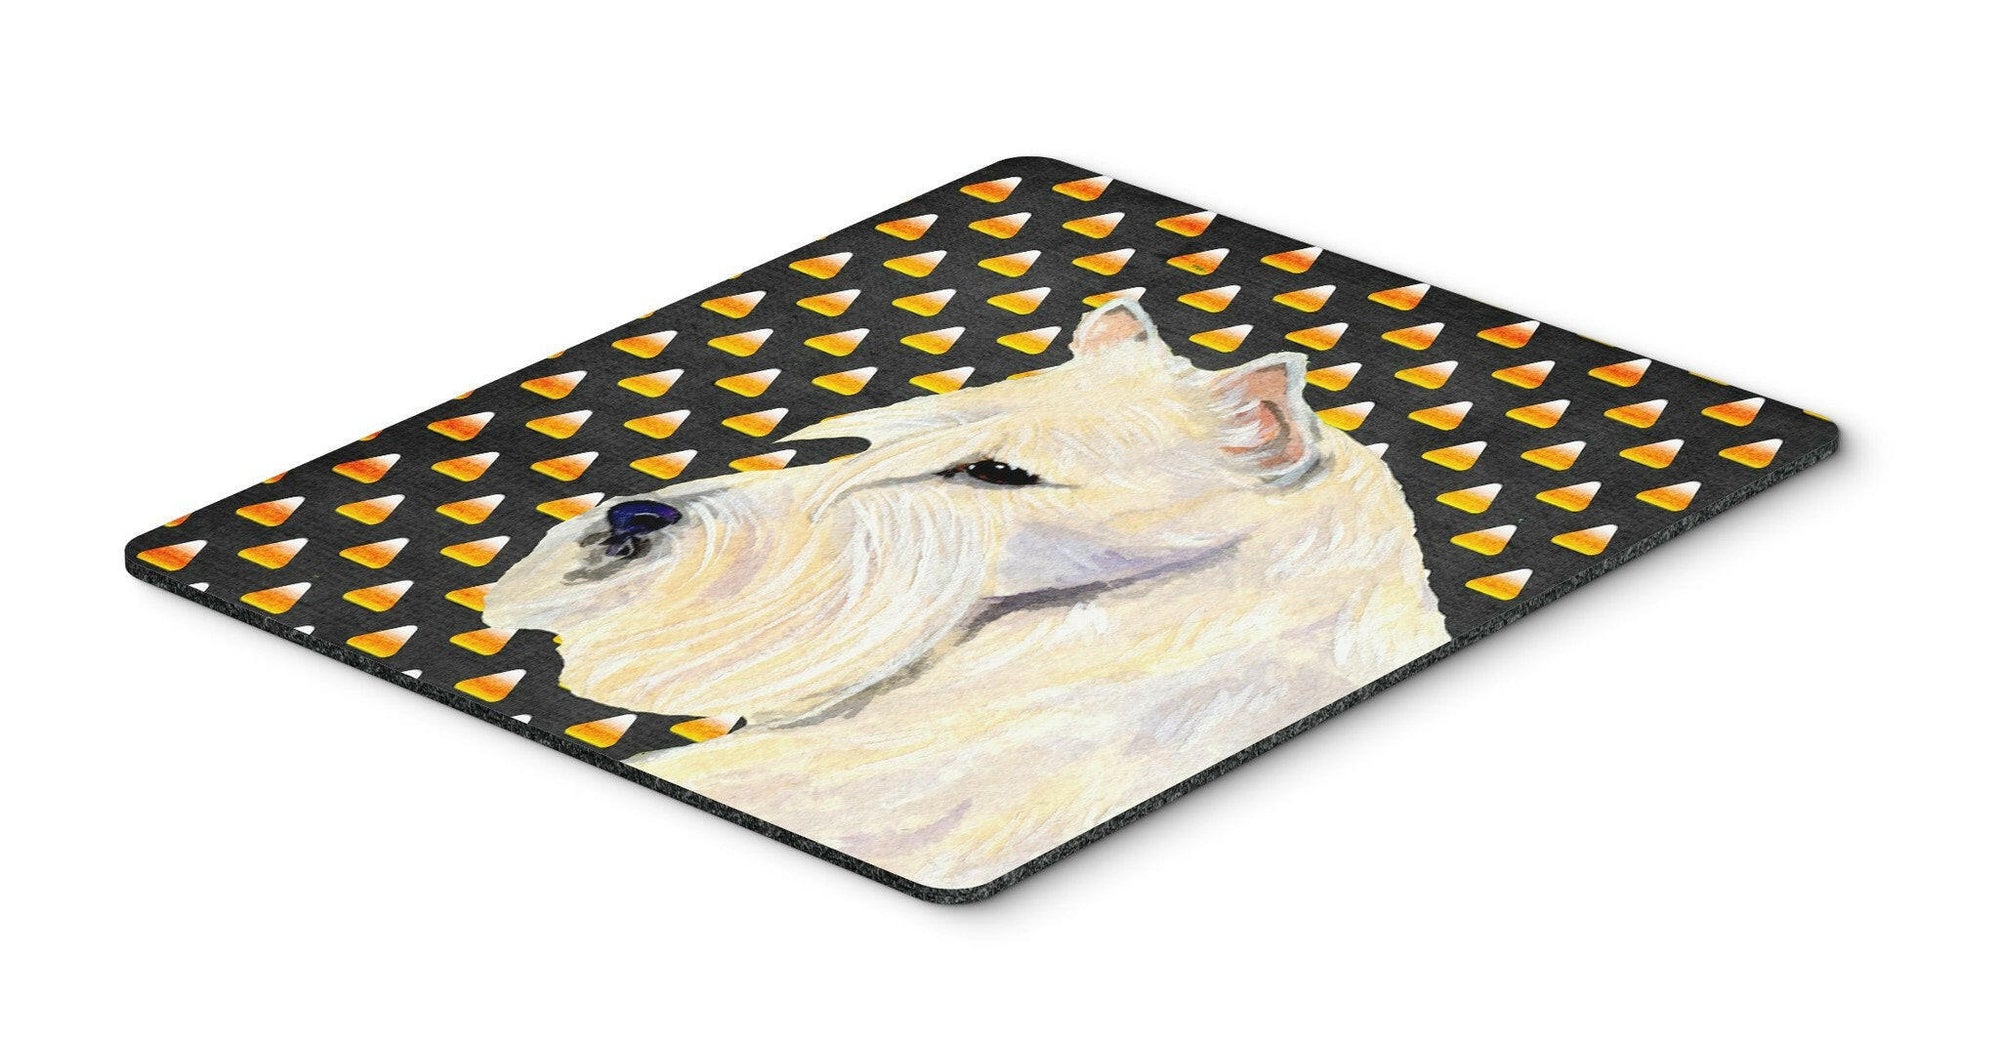 Scottish Terrier Wheaten Candy Corn Halloween Mouse Pad, Hot Pad or Trivet by Caroline's Treasures